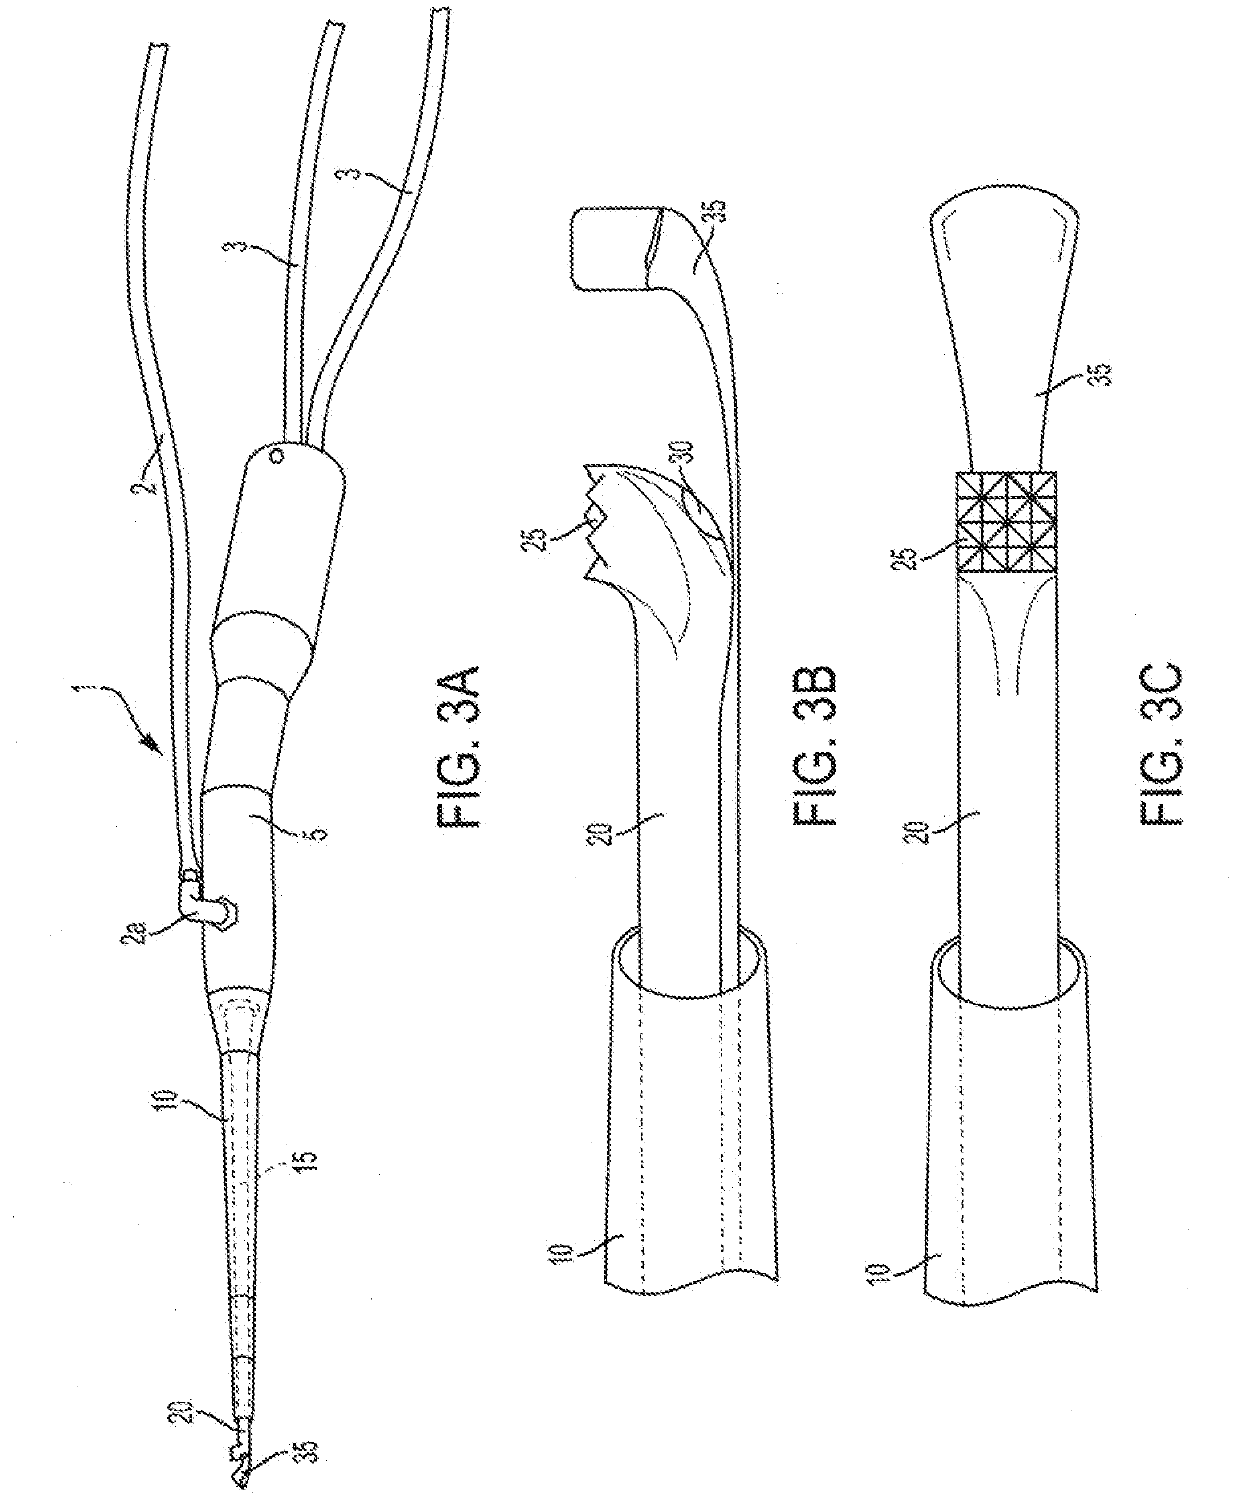 Modified ultrasound aspirator for use in and around vital structures of a body